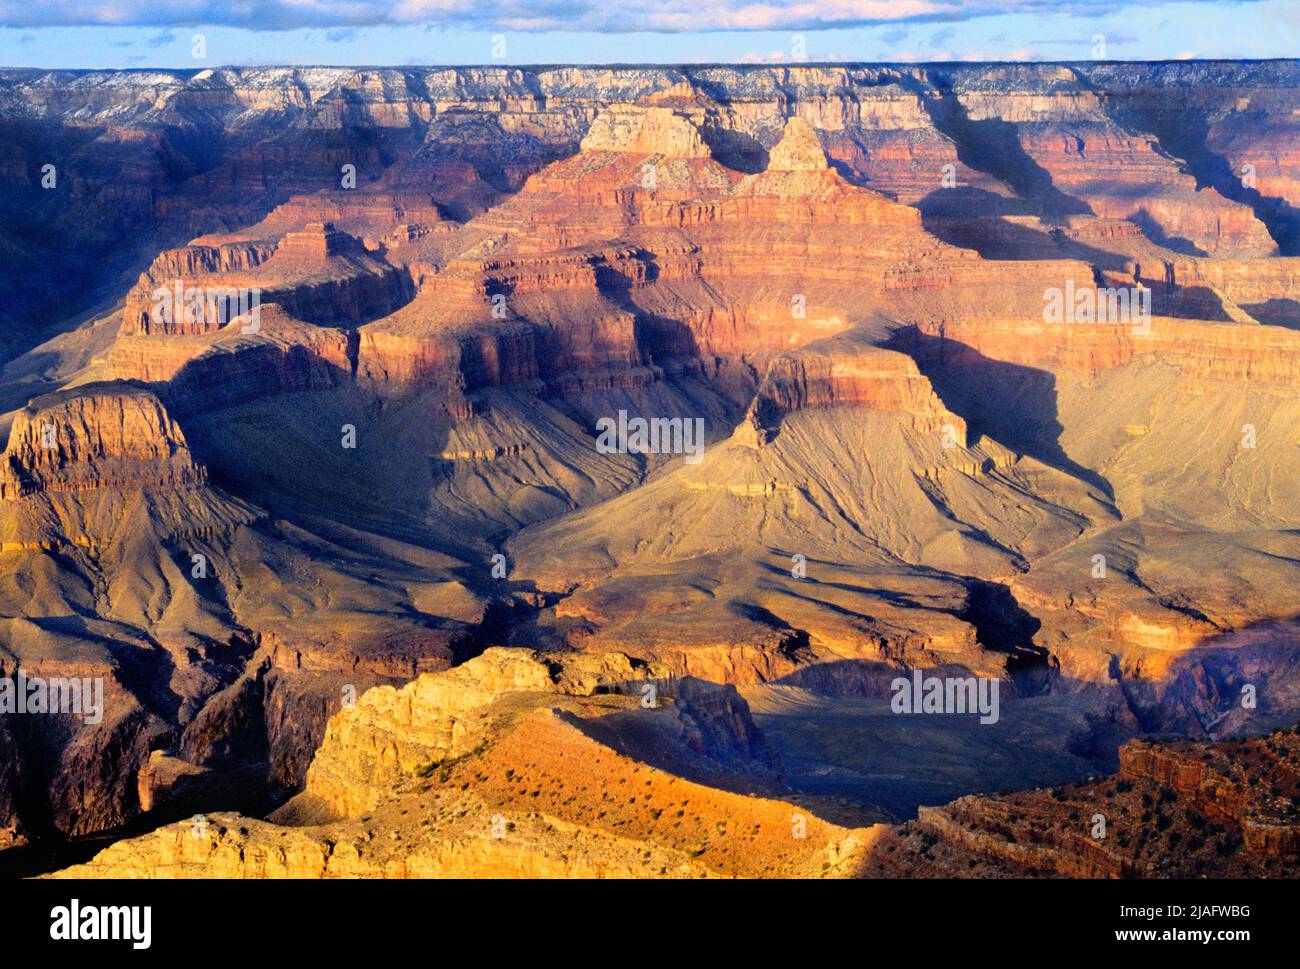 Grand Canyon National Park, Mather Point, South Rim in Arizona.  Scenic landscape view of bottom of the canyons with shadows at sunset. Southwest USA Stock Photo